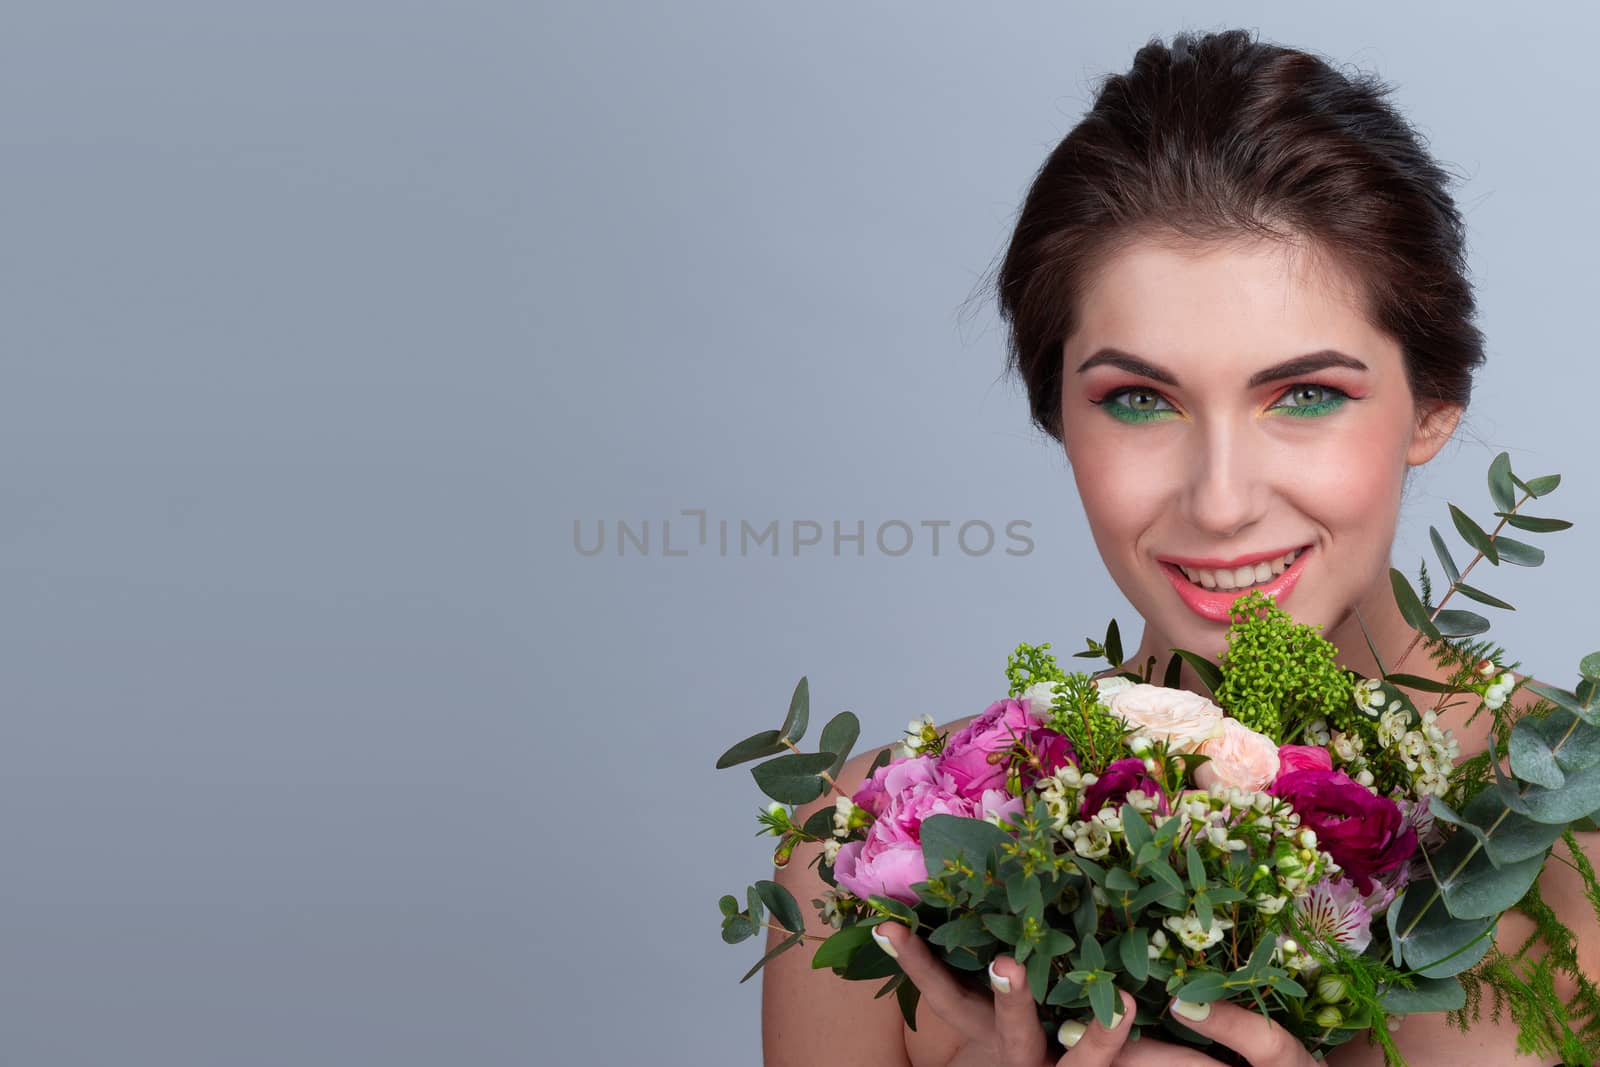 Beautiful woman with stylish make-up holding bouquet of flowers on gray background